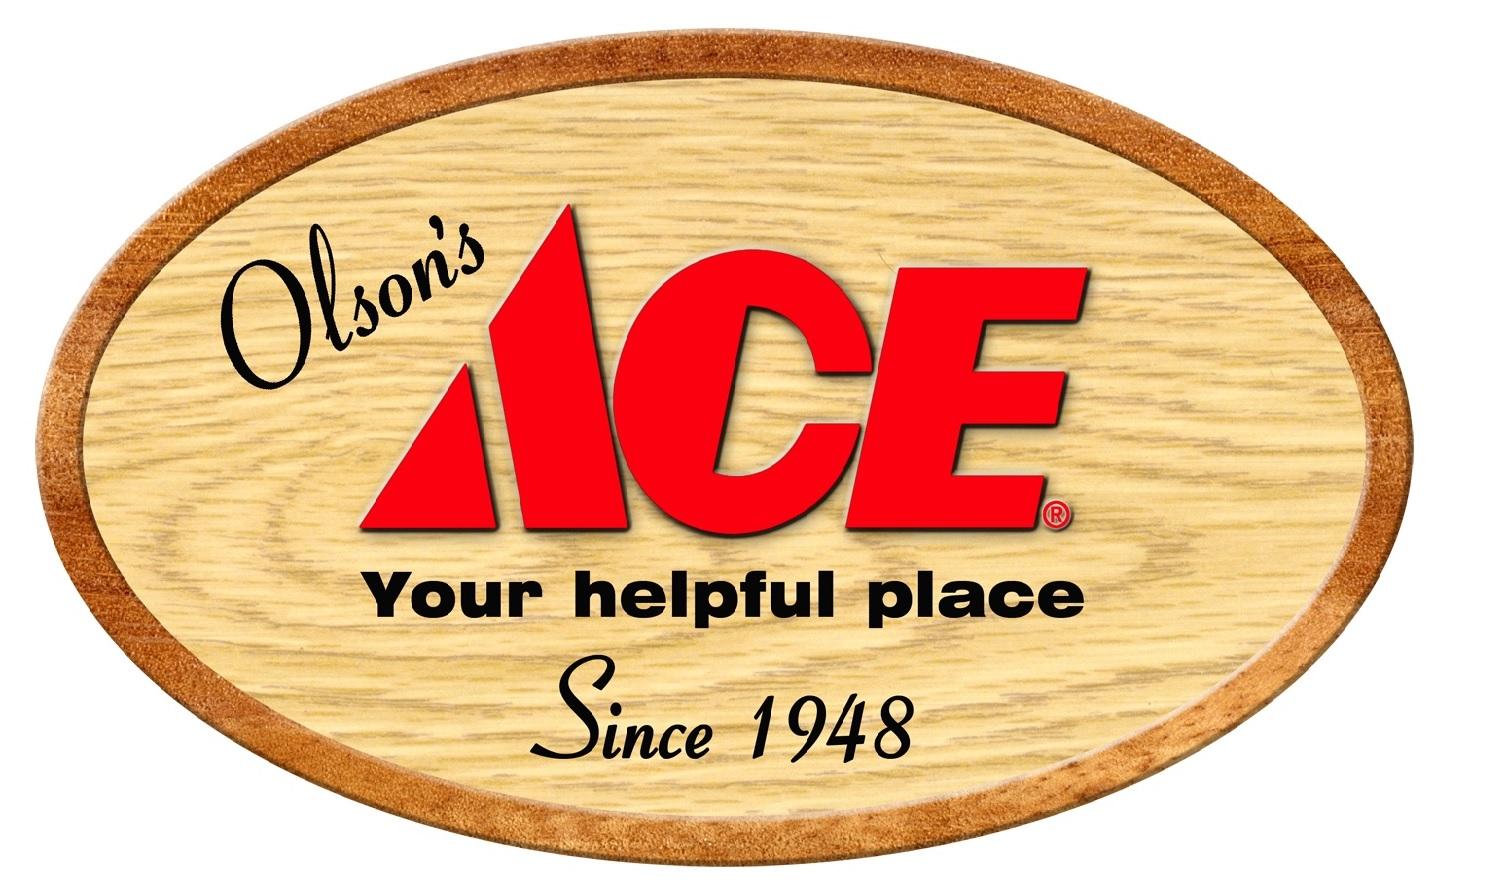 Twisty reccomend Ace hardware duncan oklahoma